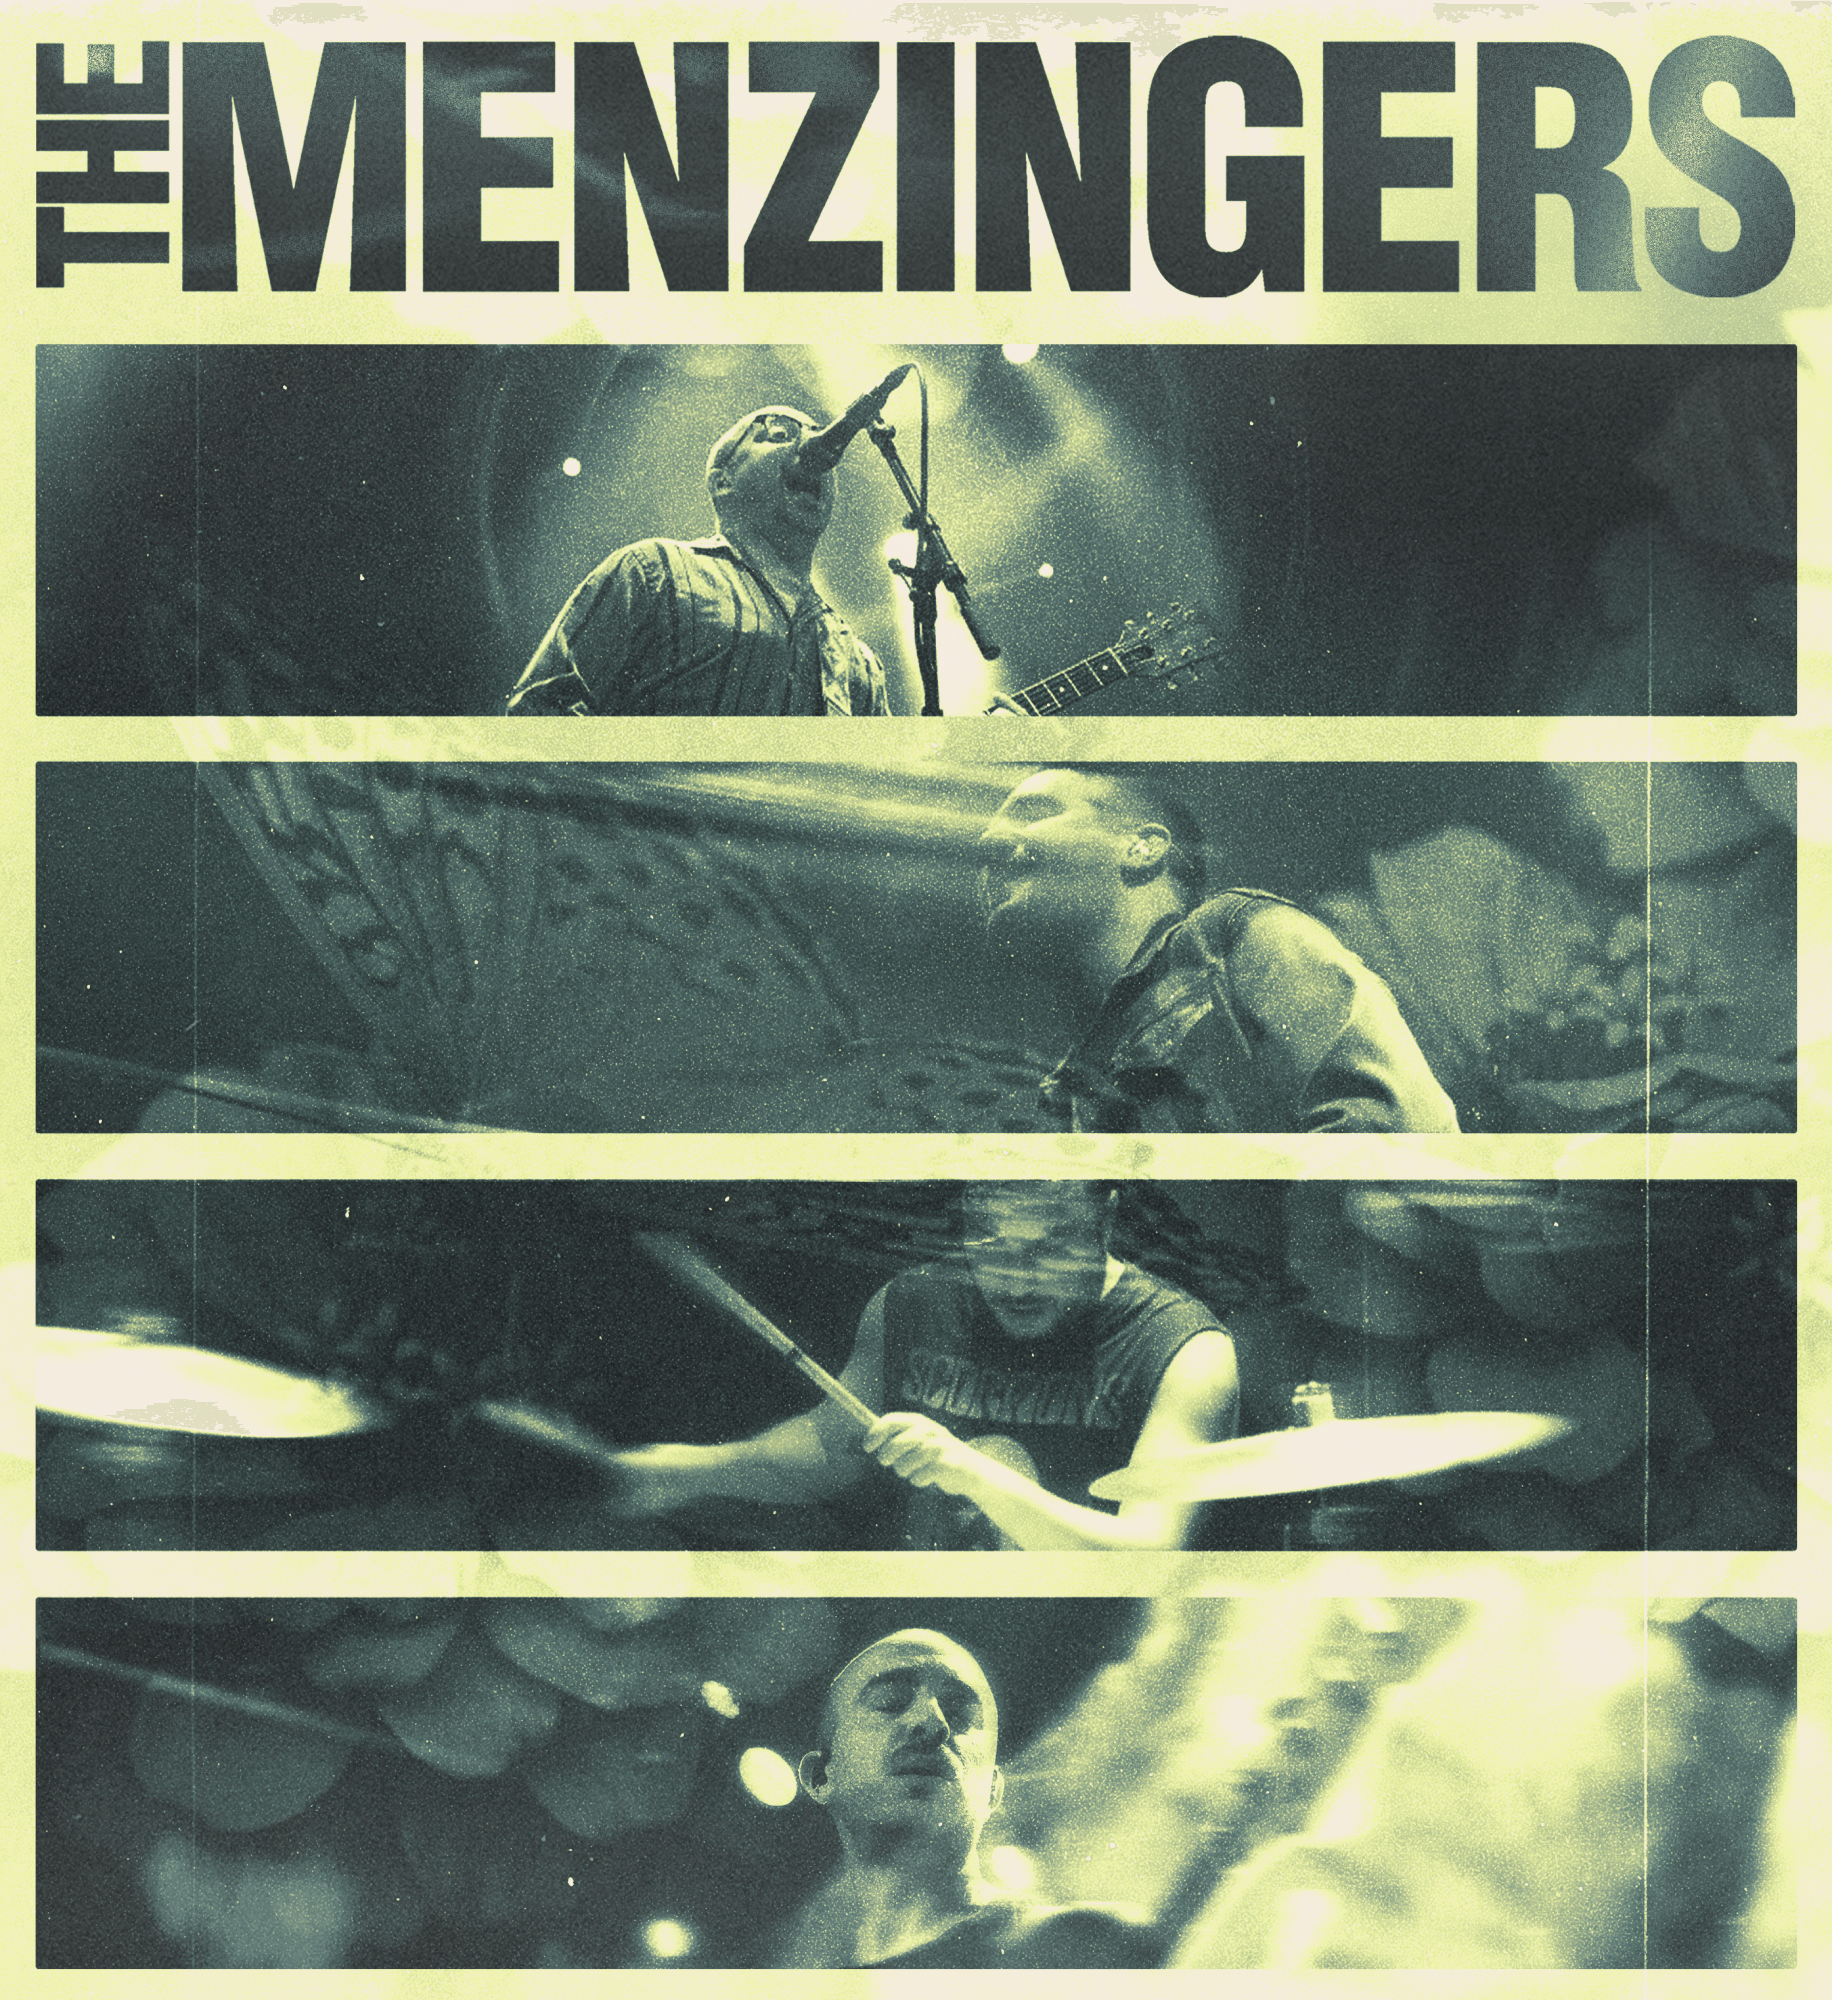 <strong>The Menzingers</strong>